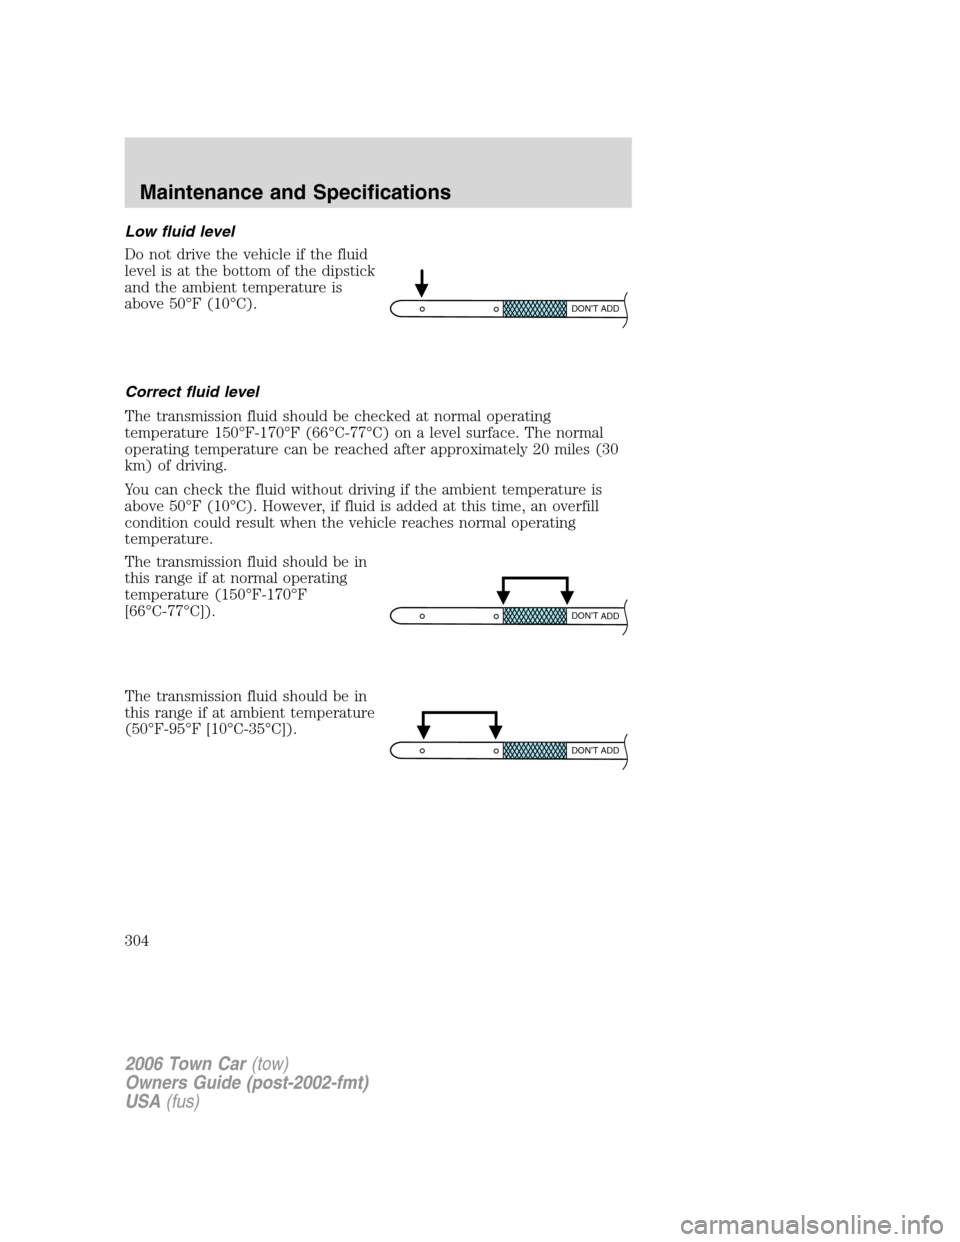 LINCOLN TOWN CAR 2006  Owners Manual Low fluid level
Do not drive the vehicle if the fluid
level is at the bottom of the dipstick
and the ambient temperature is
above 50°F (10°C).
Correct fluid level
The transmission fluid should be ch